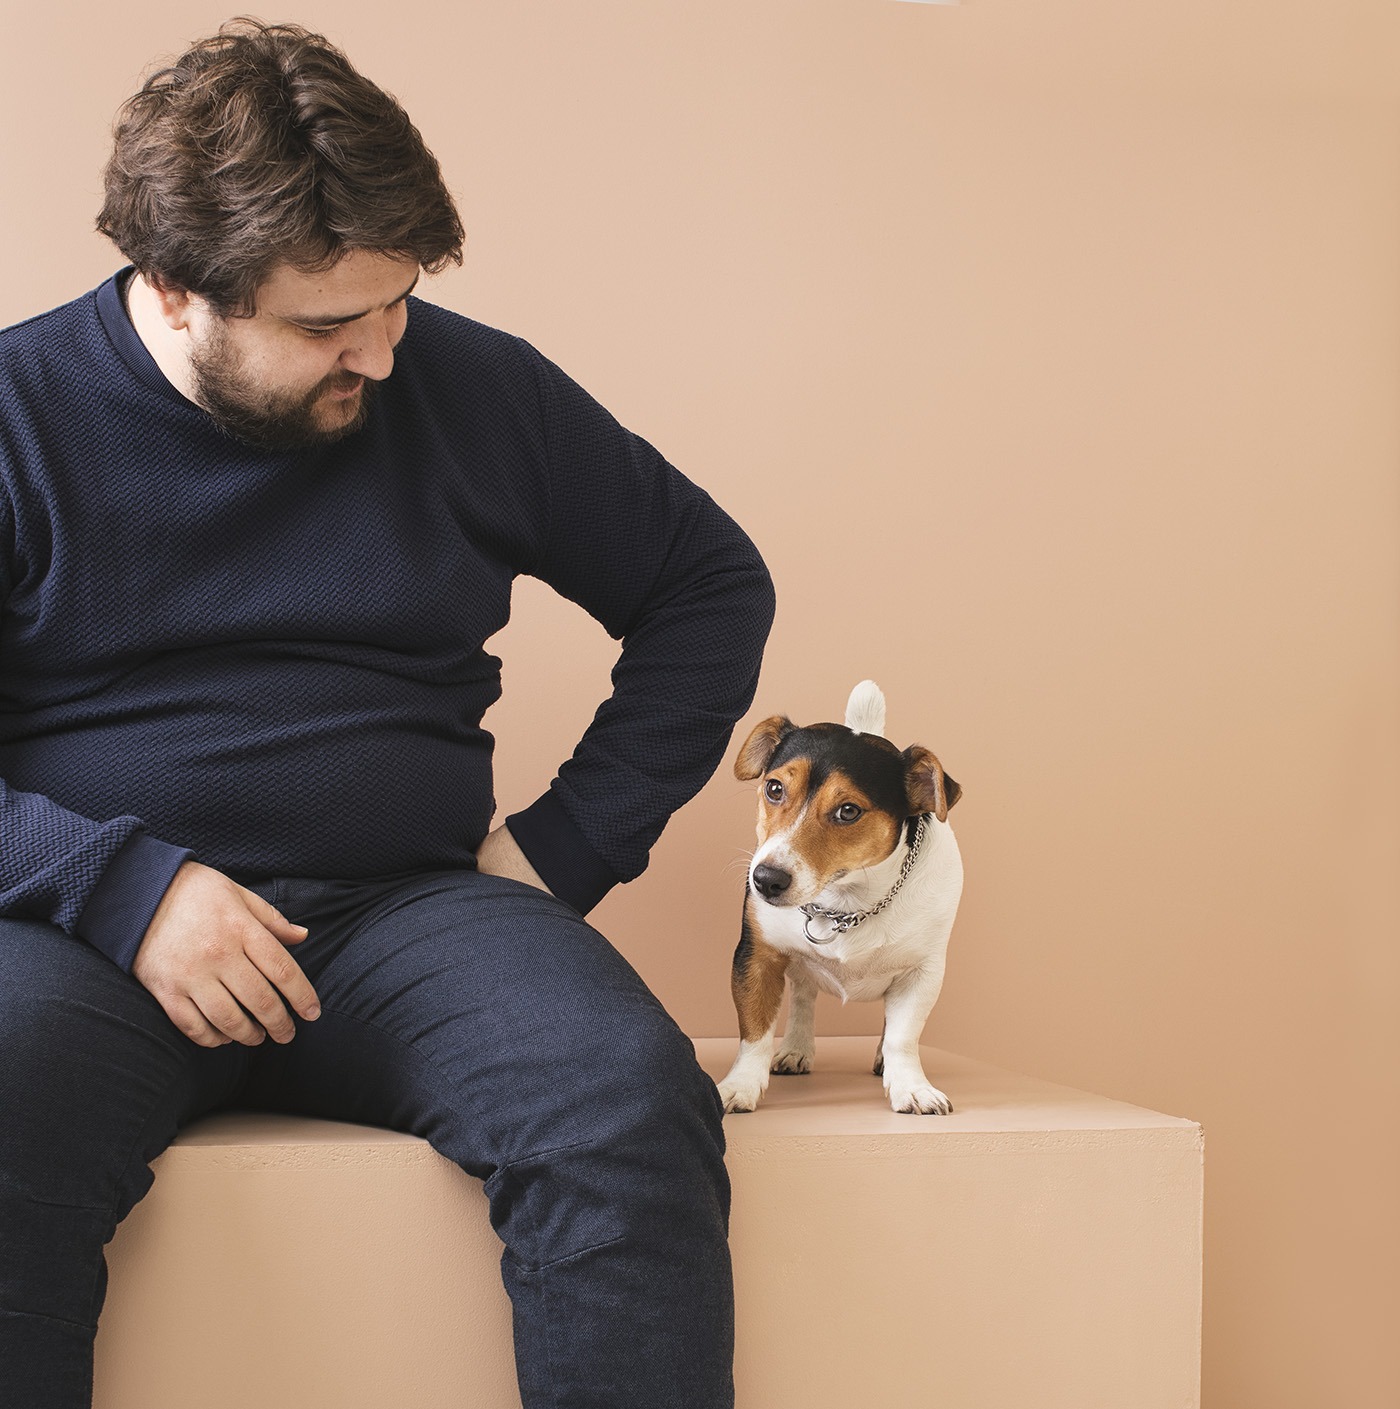 Studio prortrait of plus size young man with beard looking at cute dog.